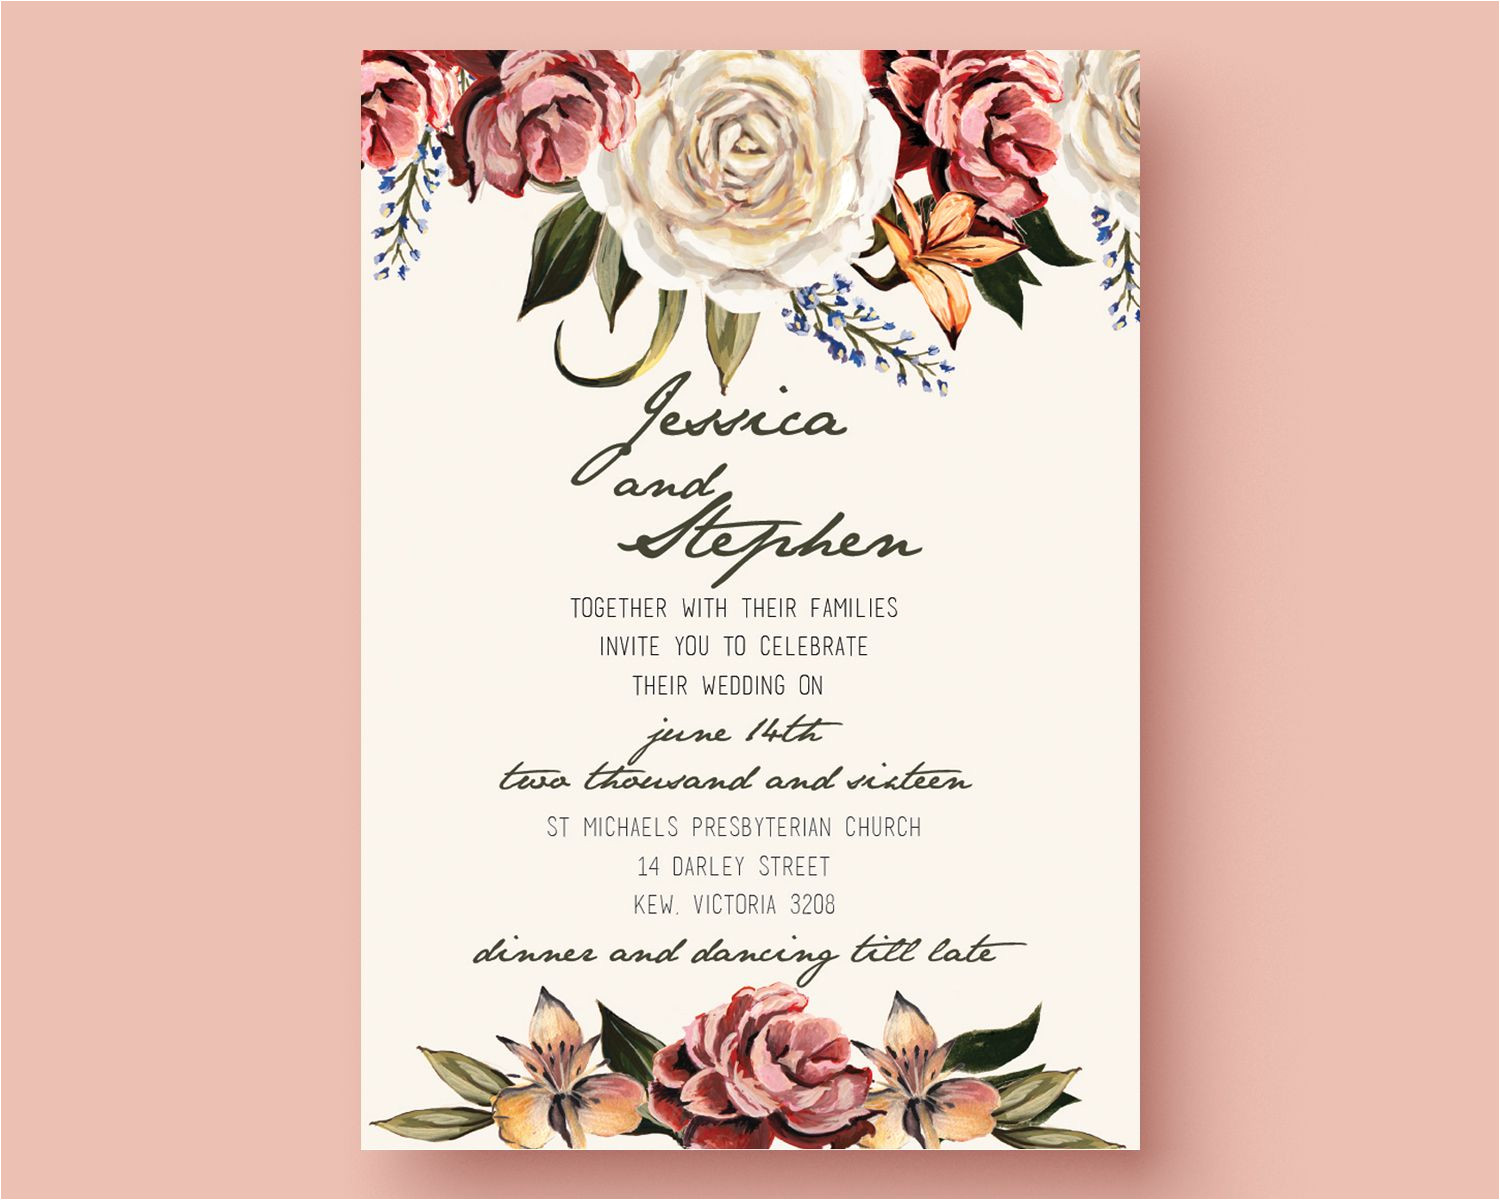 Adobe Illustrator Wedding Invitation Template Free Get the Template Free Download This is An Adobe